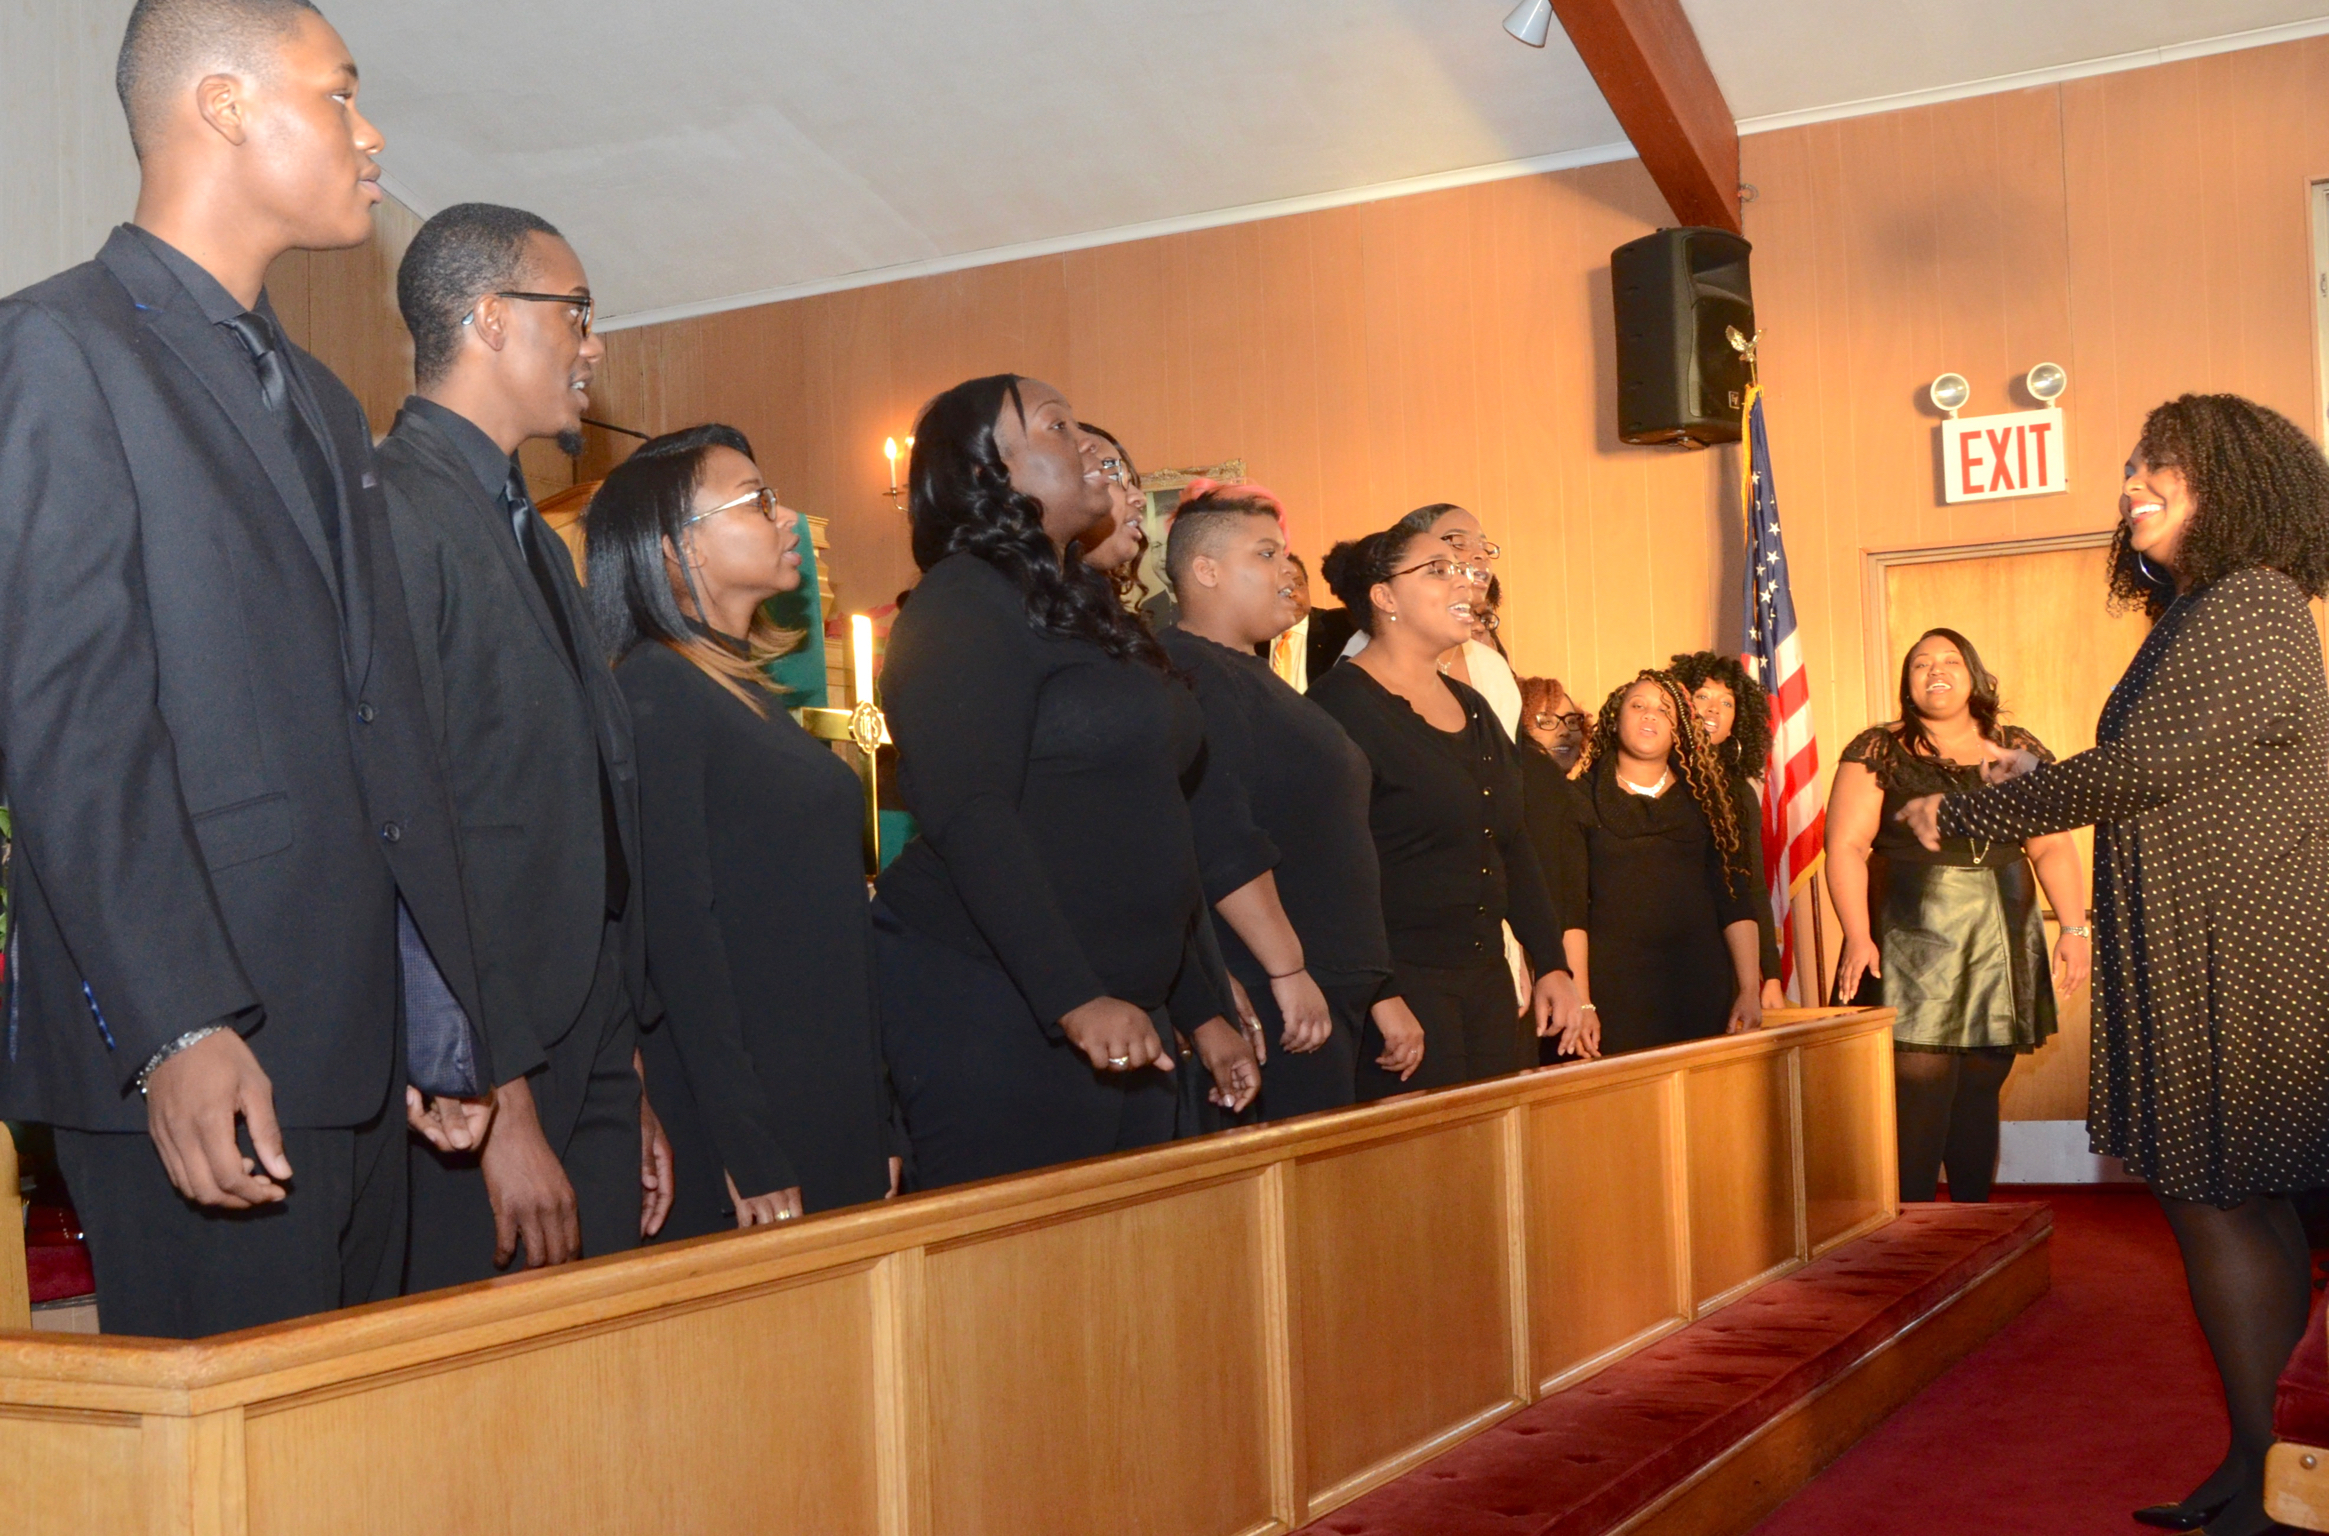 Choirs sang uplifting songs like "We Shall Overcome" for attendees at the Martin Luther King Jr. event at St. Paul AME Zion Church. (Photo by Bob Wong)